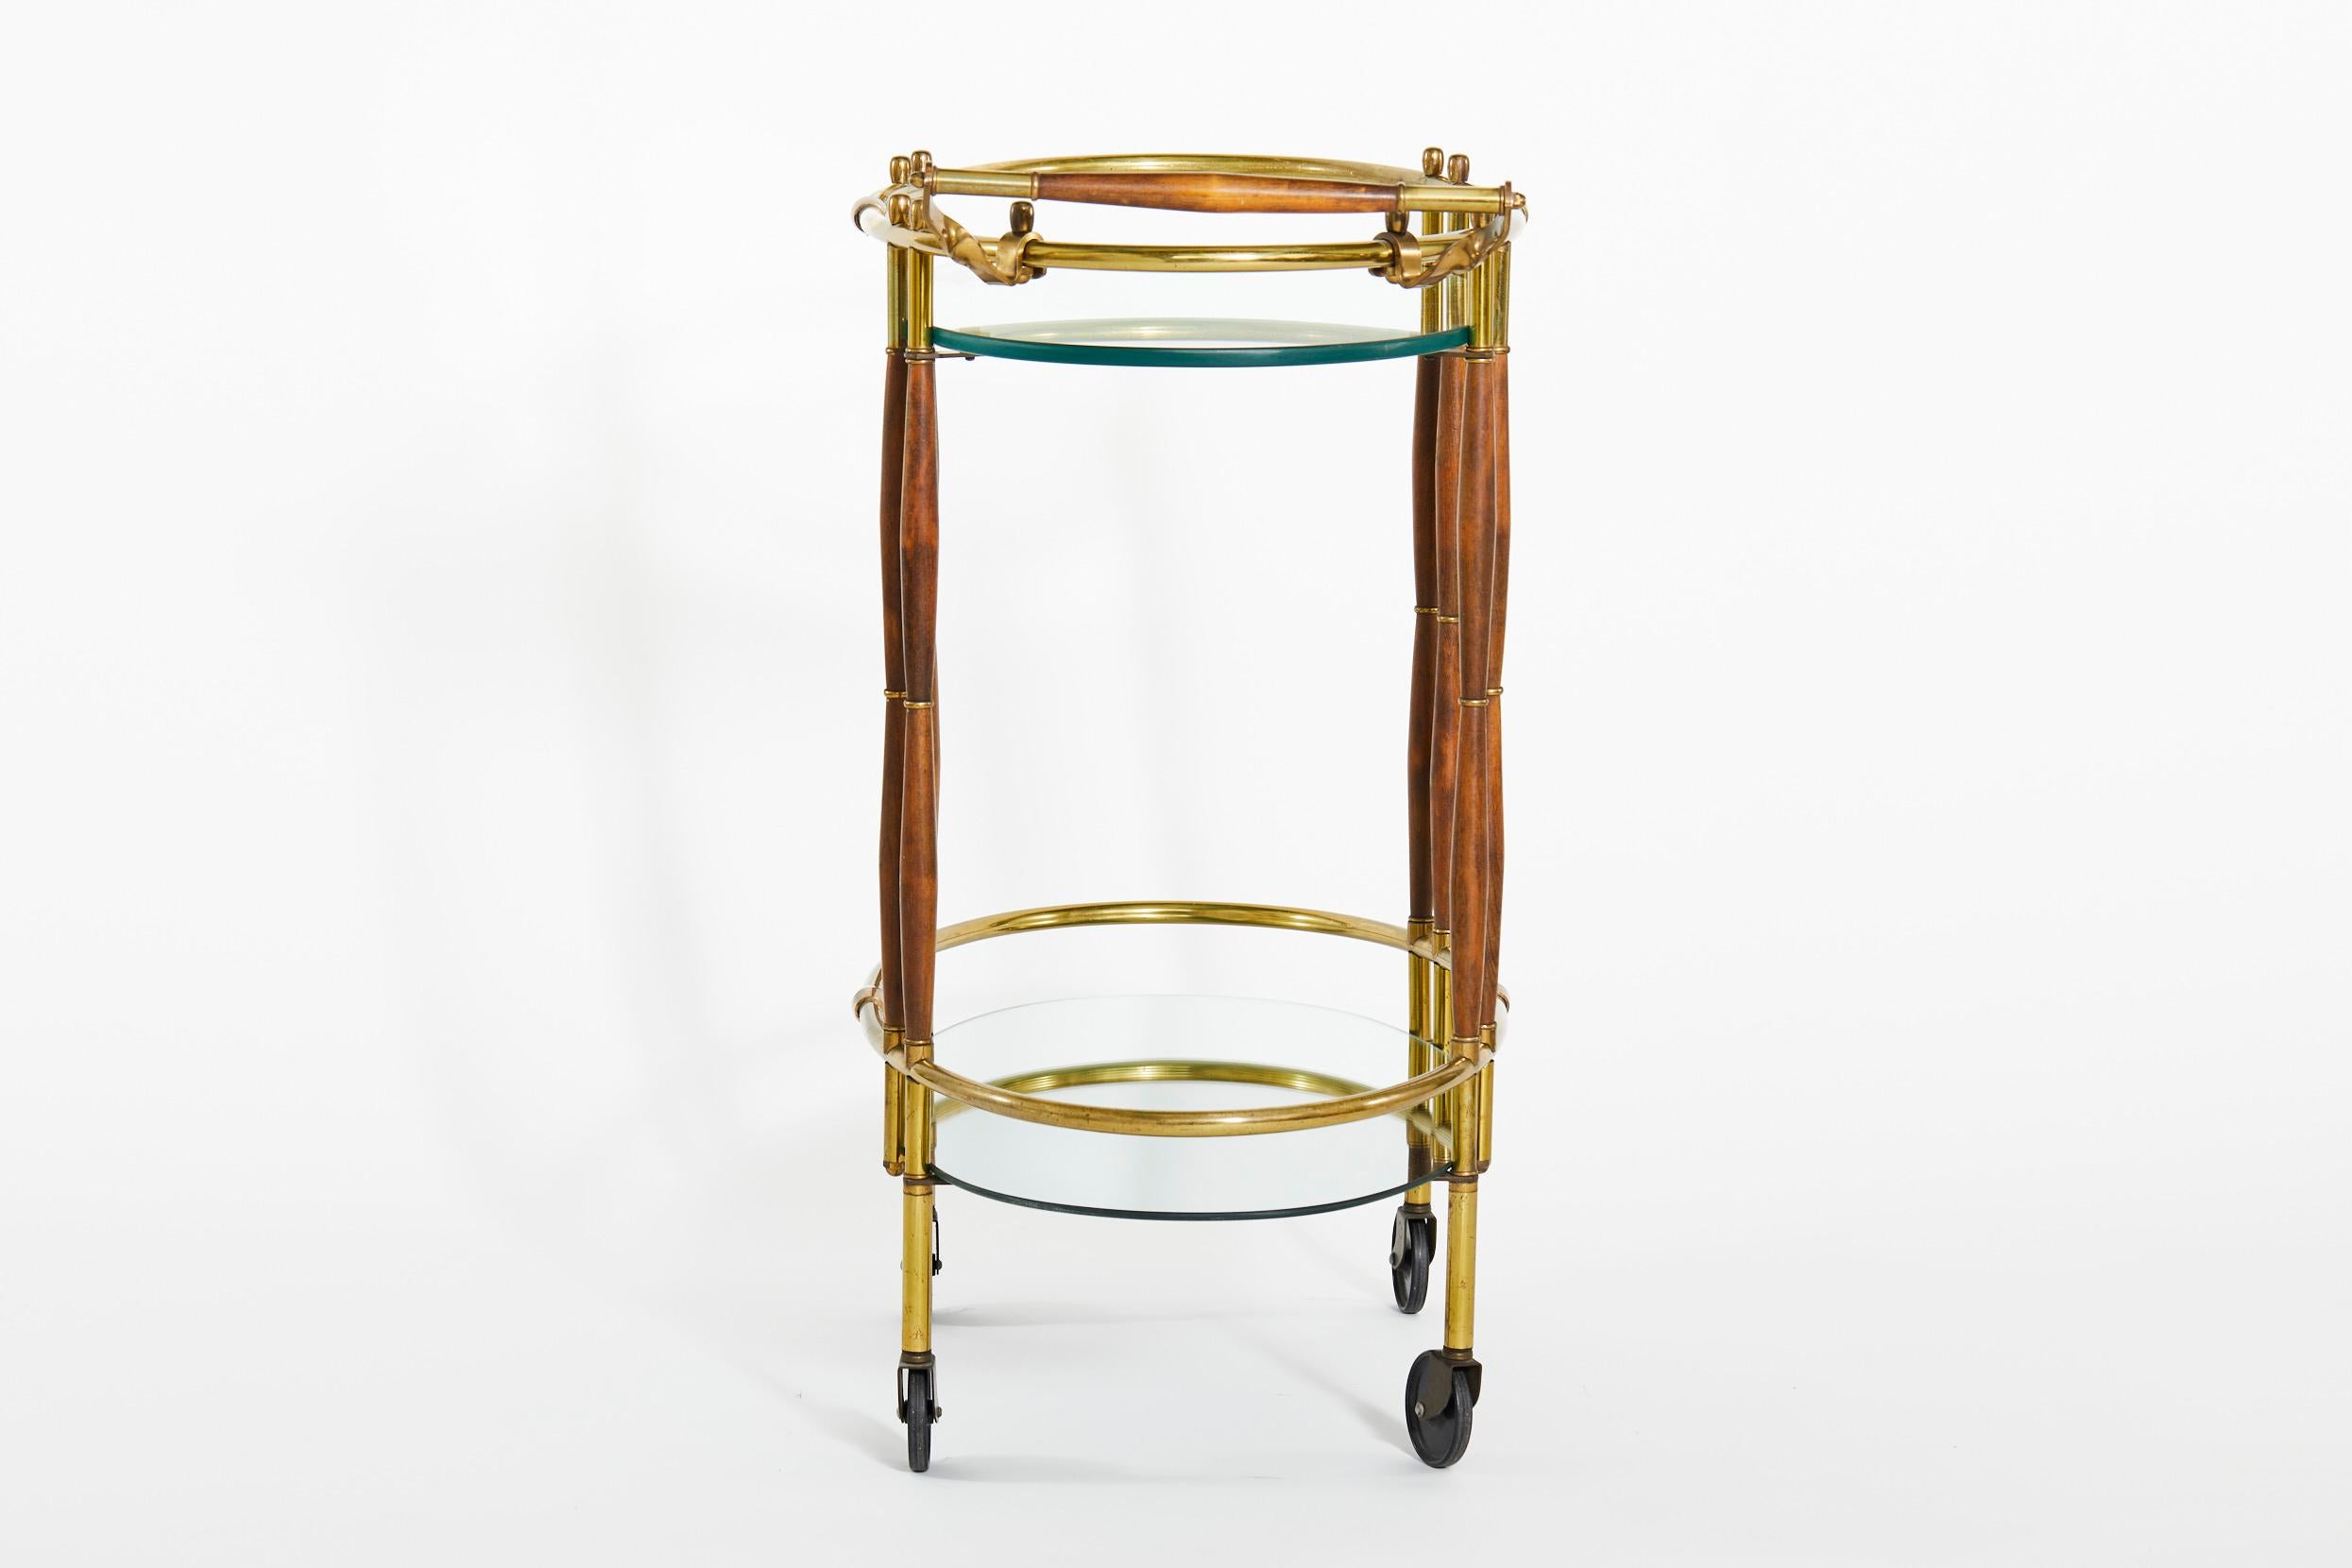 Beautiful mid 20th century brass frame with mahogany wood design details two tiered wheeled bar cart. The bar cart features very heavy glass shelve top, a lower mirrored shelve with side handle. The cart is in great condition. Minor wear consistent